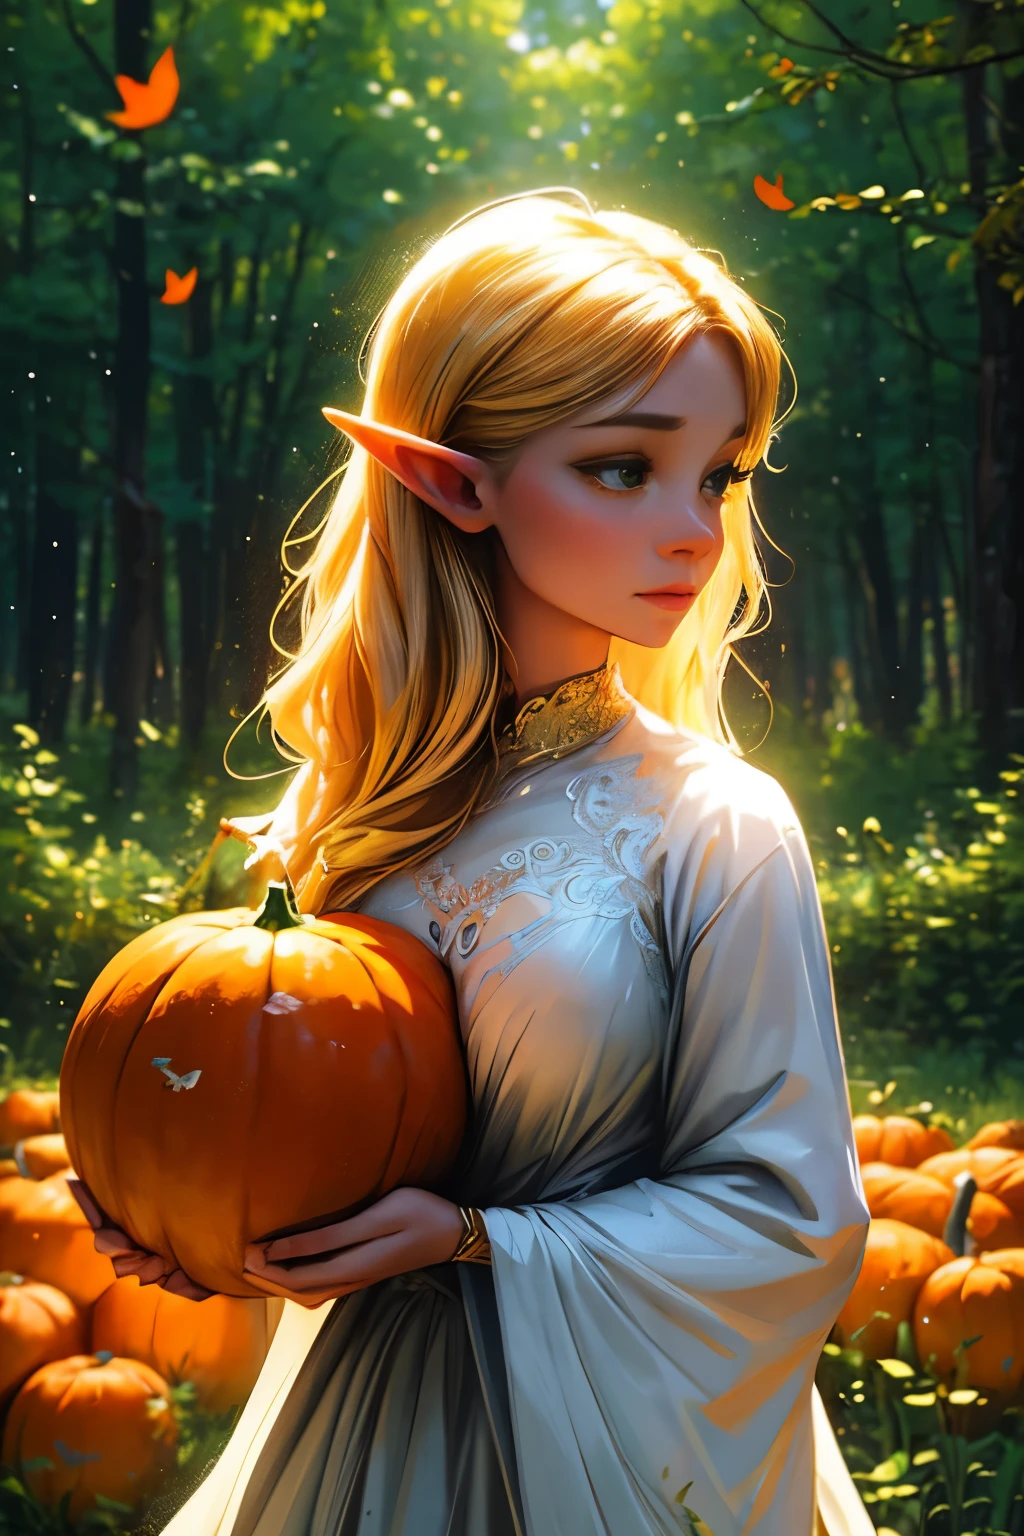 beautiful detailed elf,holding a pumpkin lantern,elegant posture,golden hair flowing in the wind,forest background,magical atmosphere,fairy tale feeling,vibrant colors,soft lighting,enchanted forest,ethereal beauty,portrait,mythical creature,magic,autumn theme,whimsical,glowing eyes,fantasy art,impressive details,mystical,sparkling,delicate features,luminous pumpkin,dreamlike,pure and graceful,enchanted garden,feminine power,mesmerizing,airy and light,imagination and wonder,serene expression,enchanting,ethereal glow